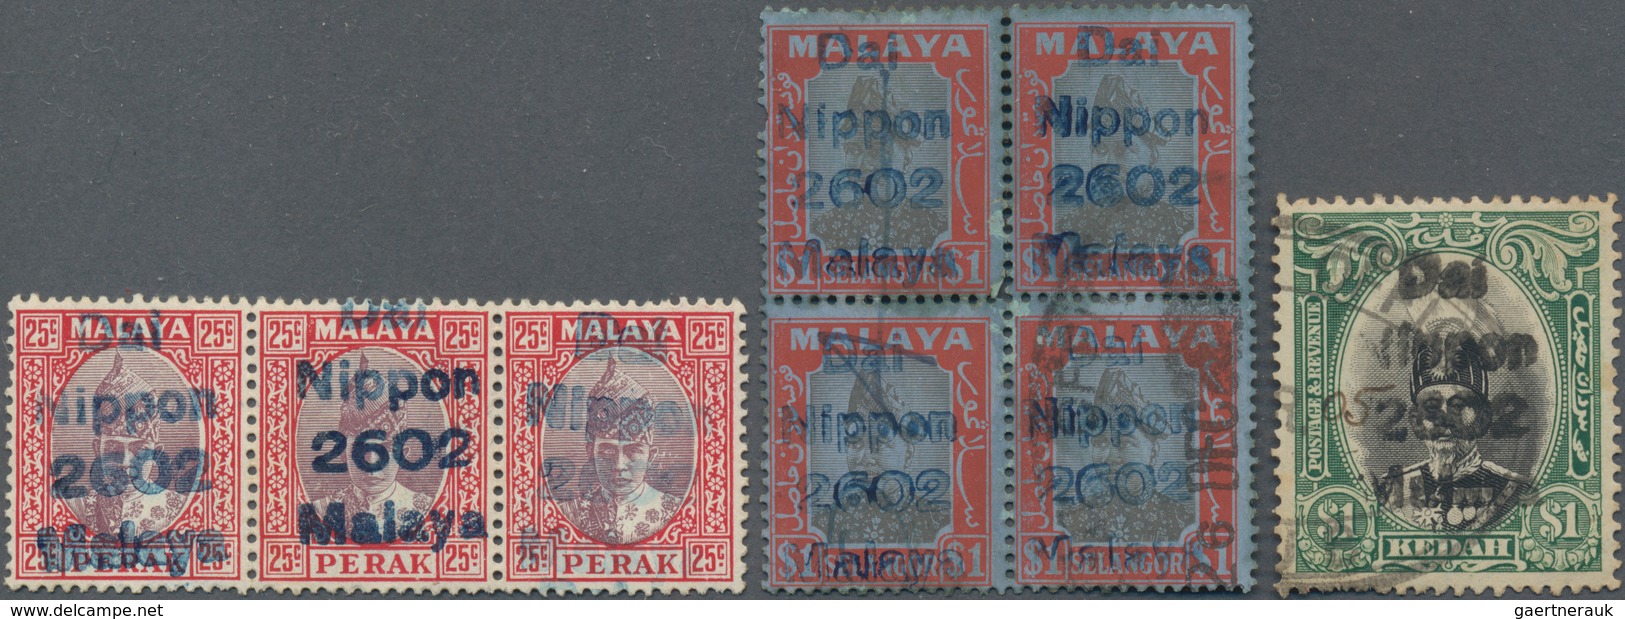 Japanische Besetzung  WK II - Malaya: 1942, General Issues, Fiscals, Ovpt. Blue "Dai Nippon 2602": P - Malaysia (1964-...)